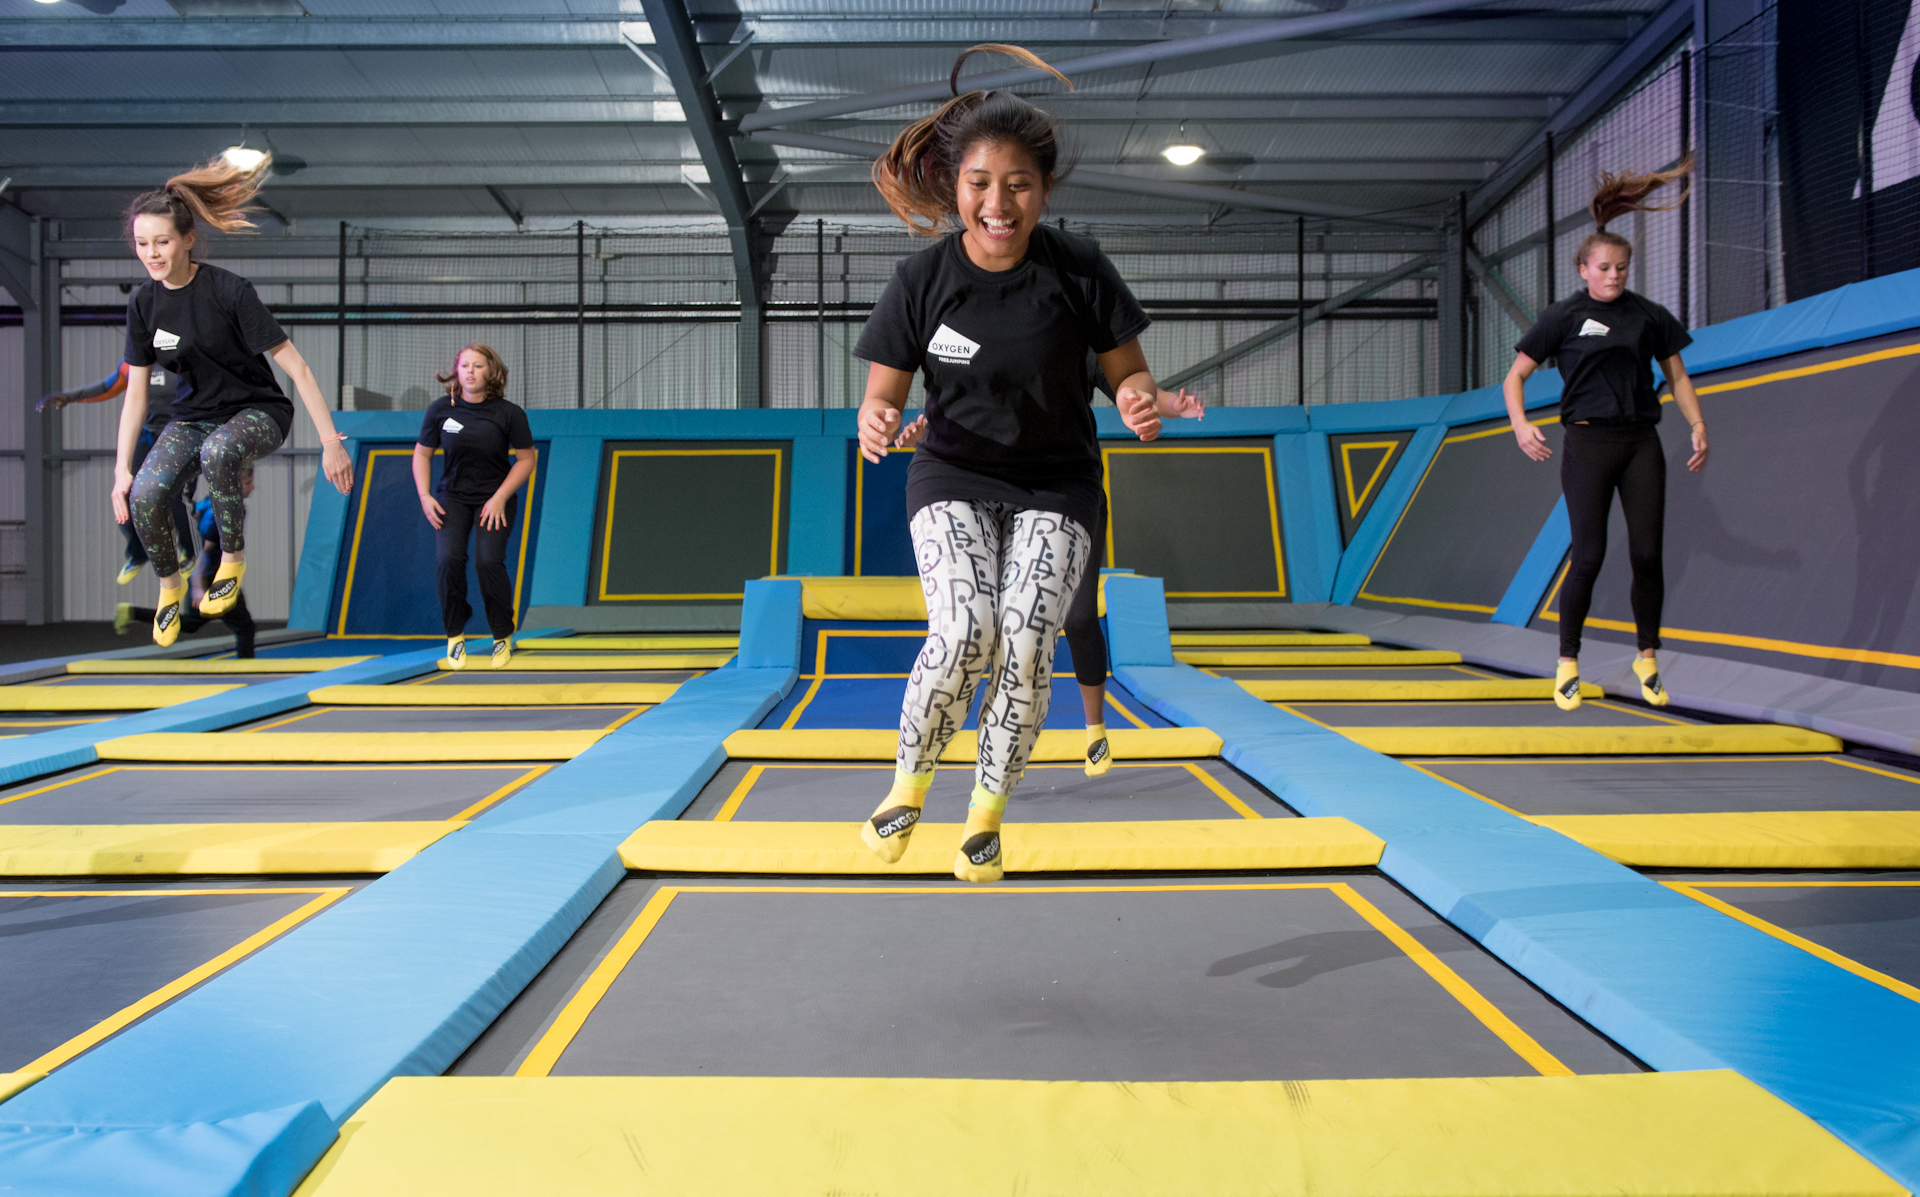 Oxygen Freejumping | Things to do in London